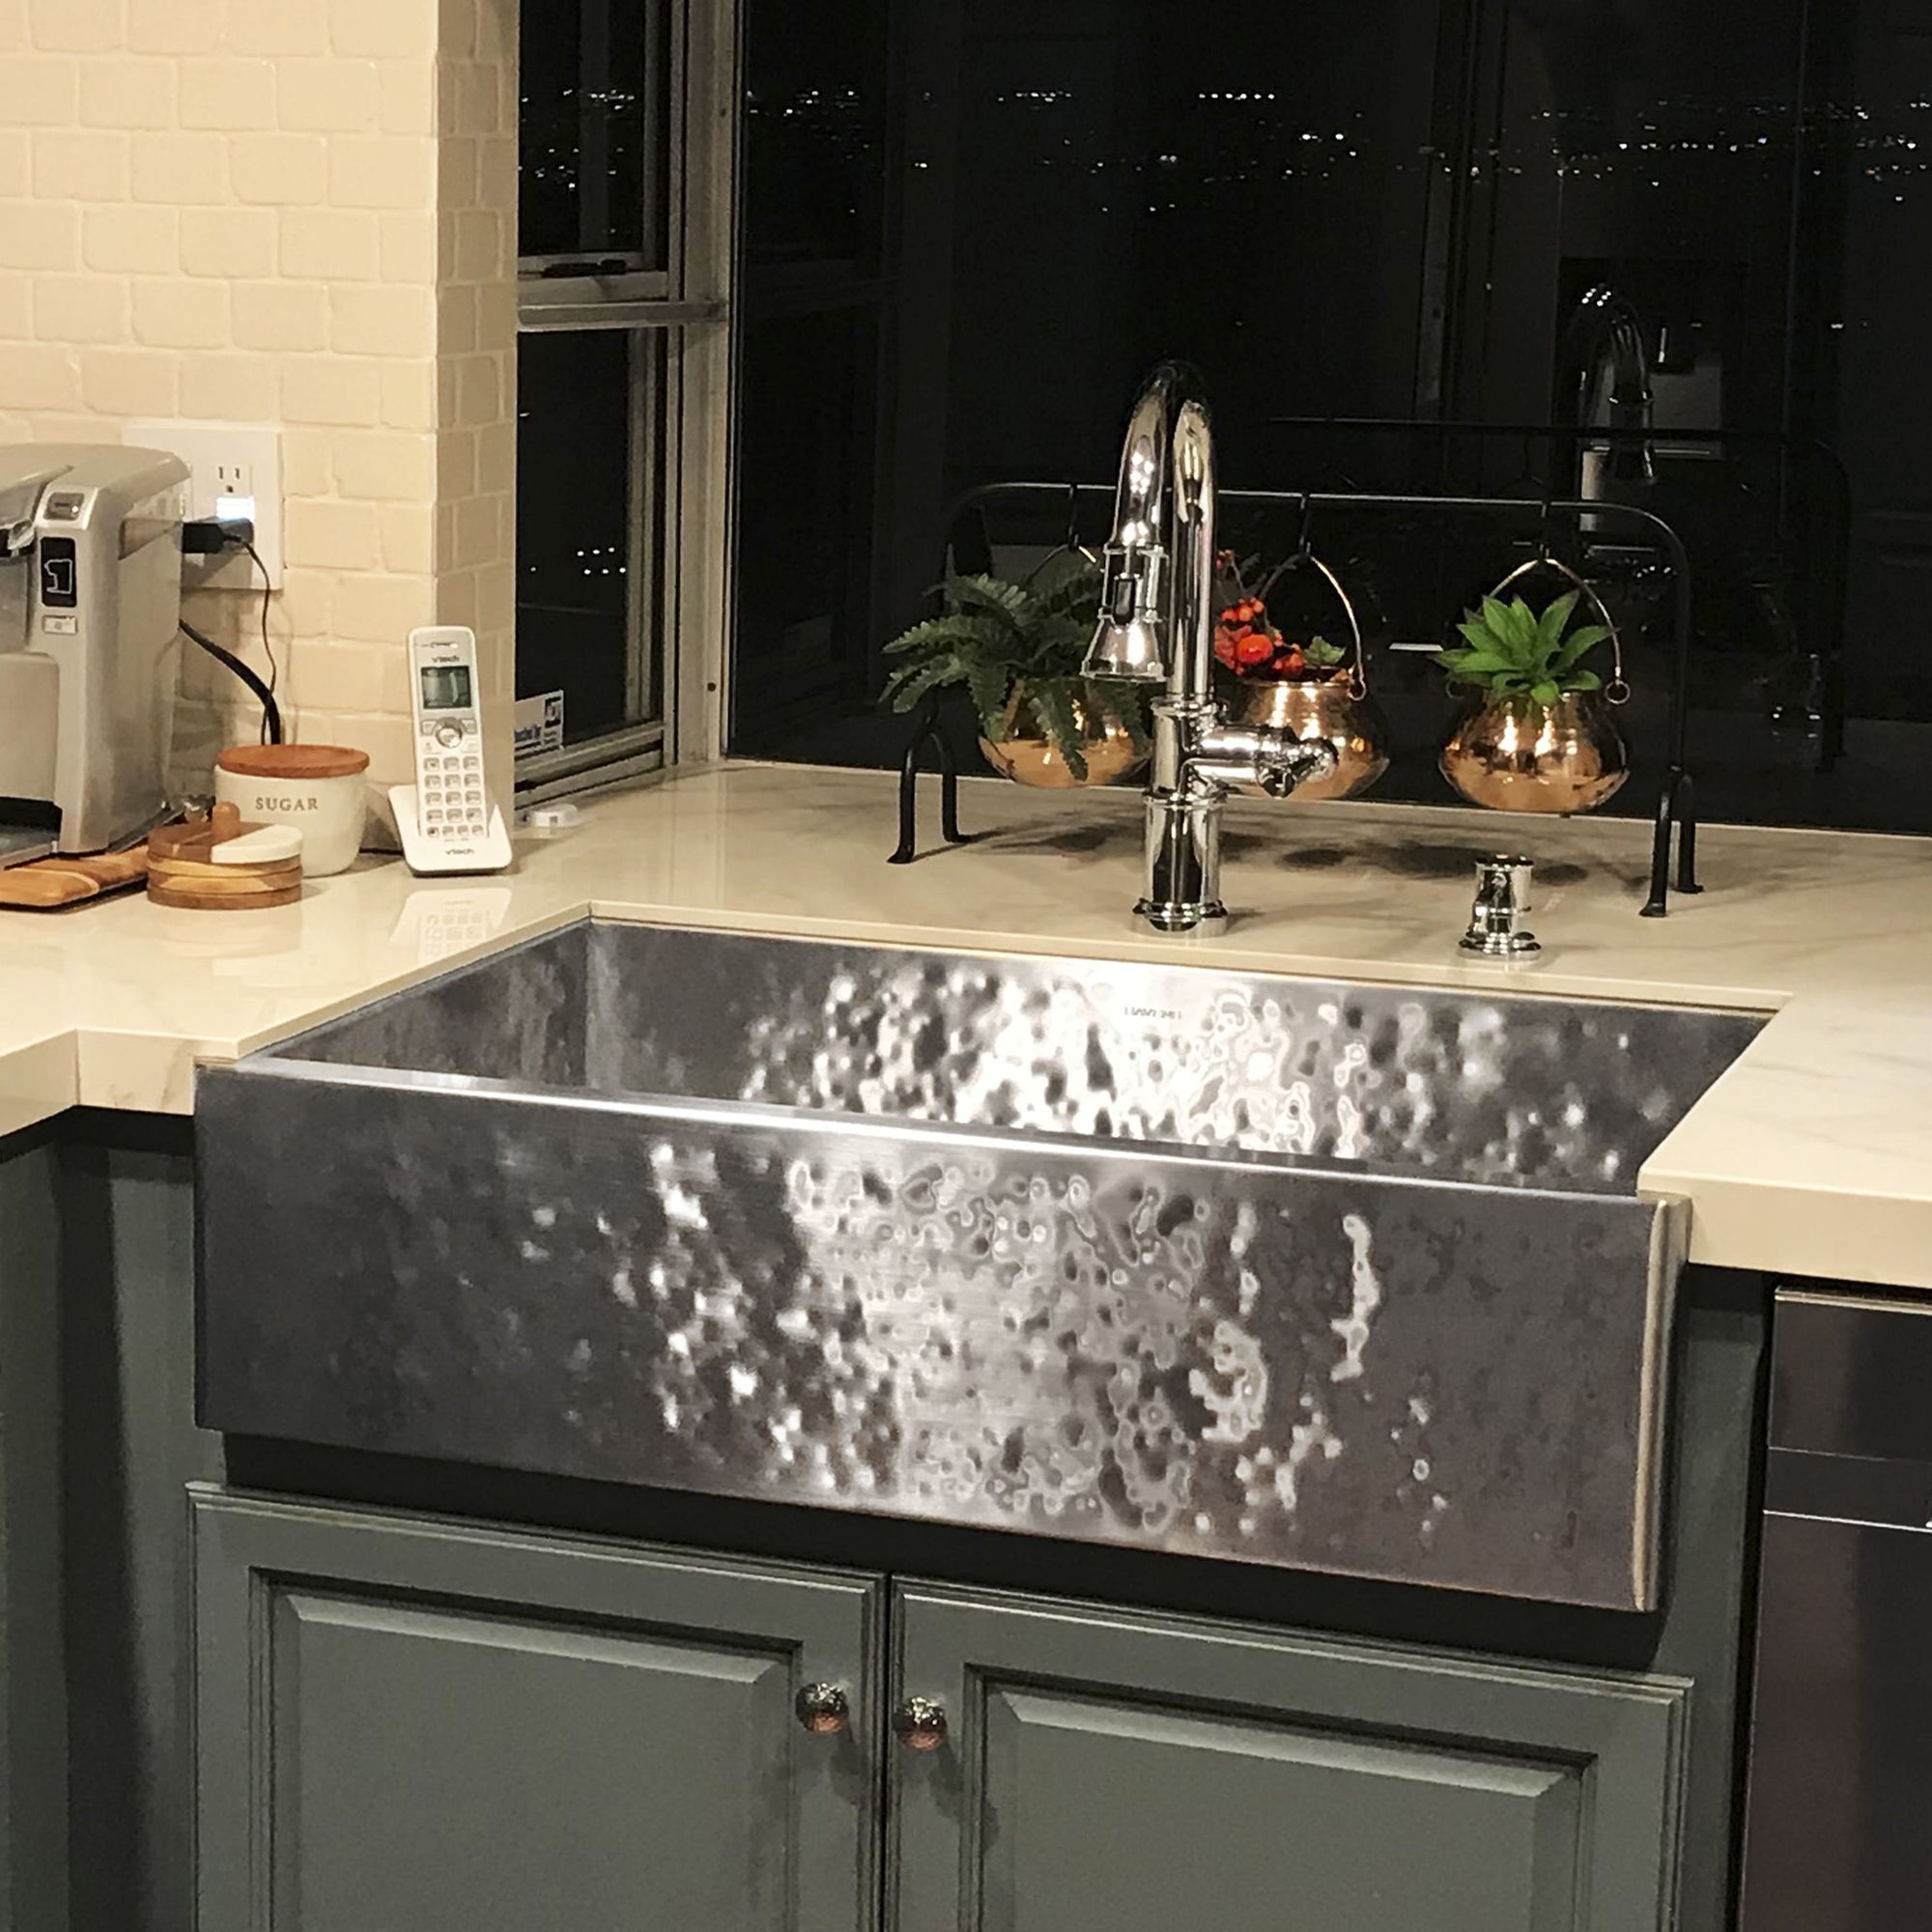 Fantastic Farmhouse Sinks: Apron-Front Sinks in Gorgeous Settings